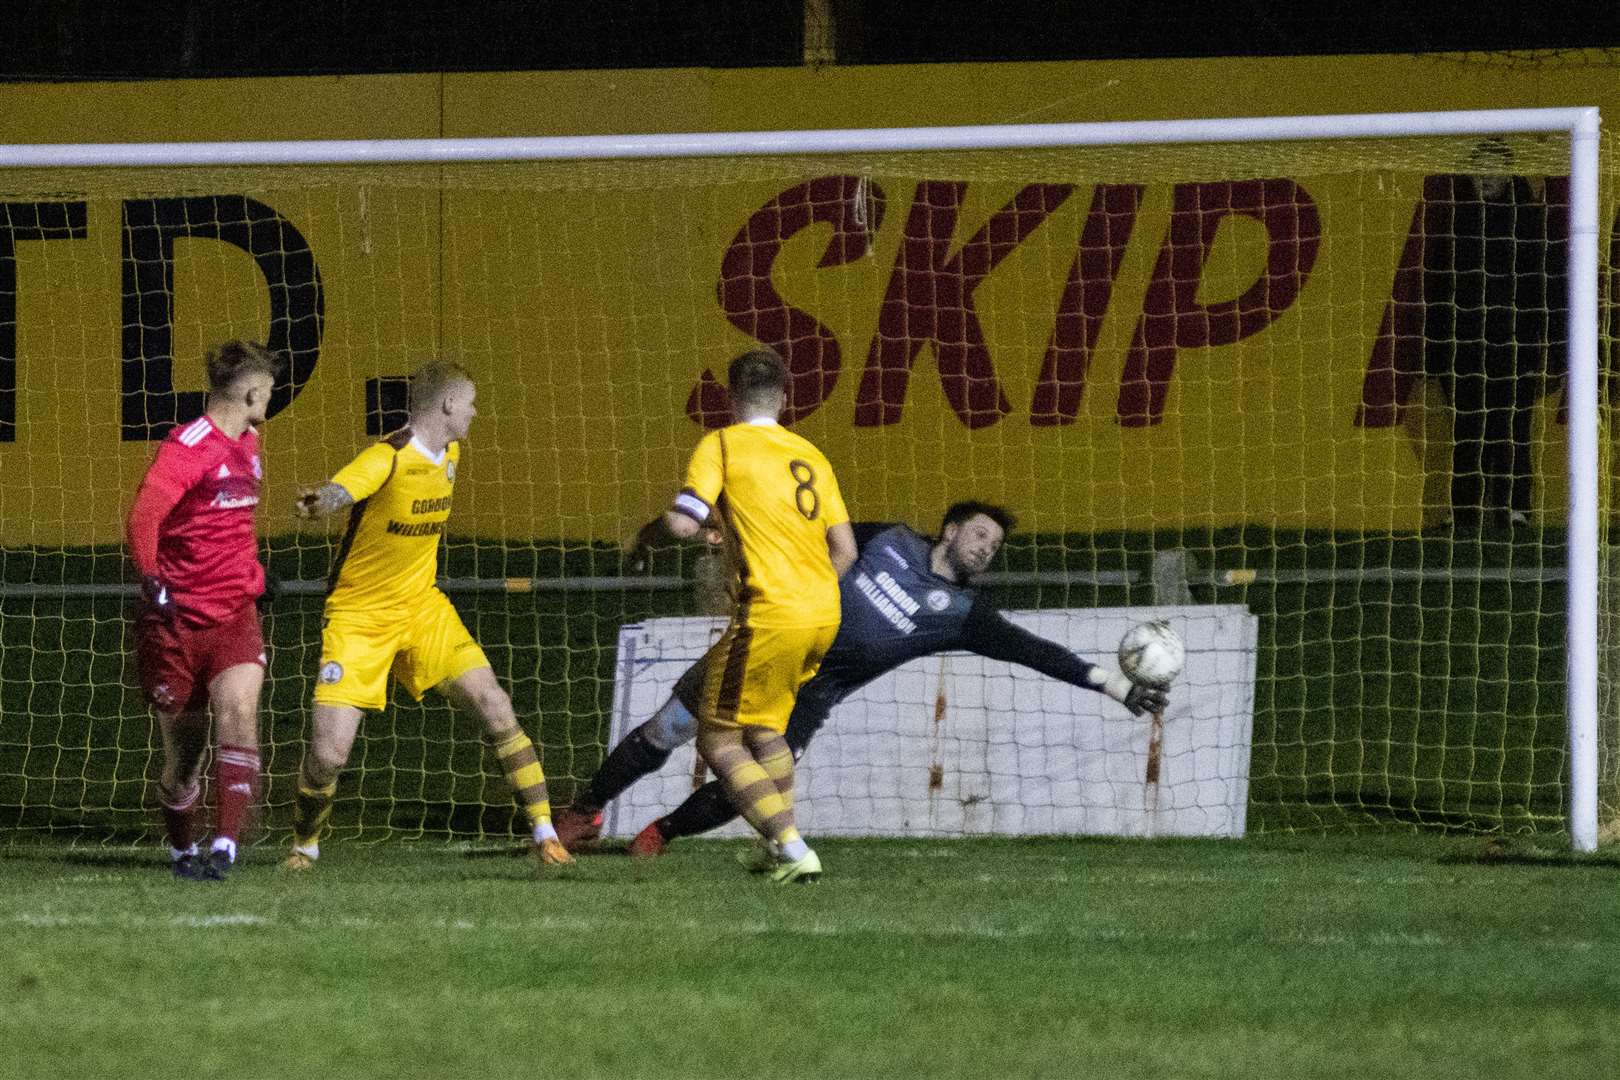 An excellent save from Forres keeper Stuart Knight denied Lossiemouth's Ross Elliot with a first half goal. ..Forres Mechanics FC (1) vs Lossiemouth FC (0) - Highland Fotball League 22/23 - Mosset Park, Forres 23/12/22...Picture: Daniel Forsyth..